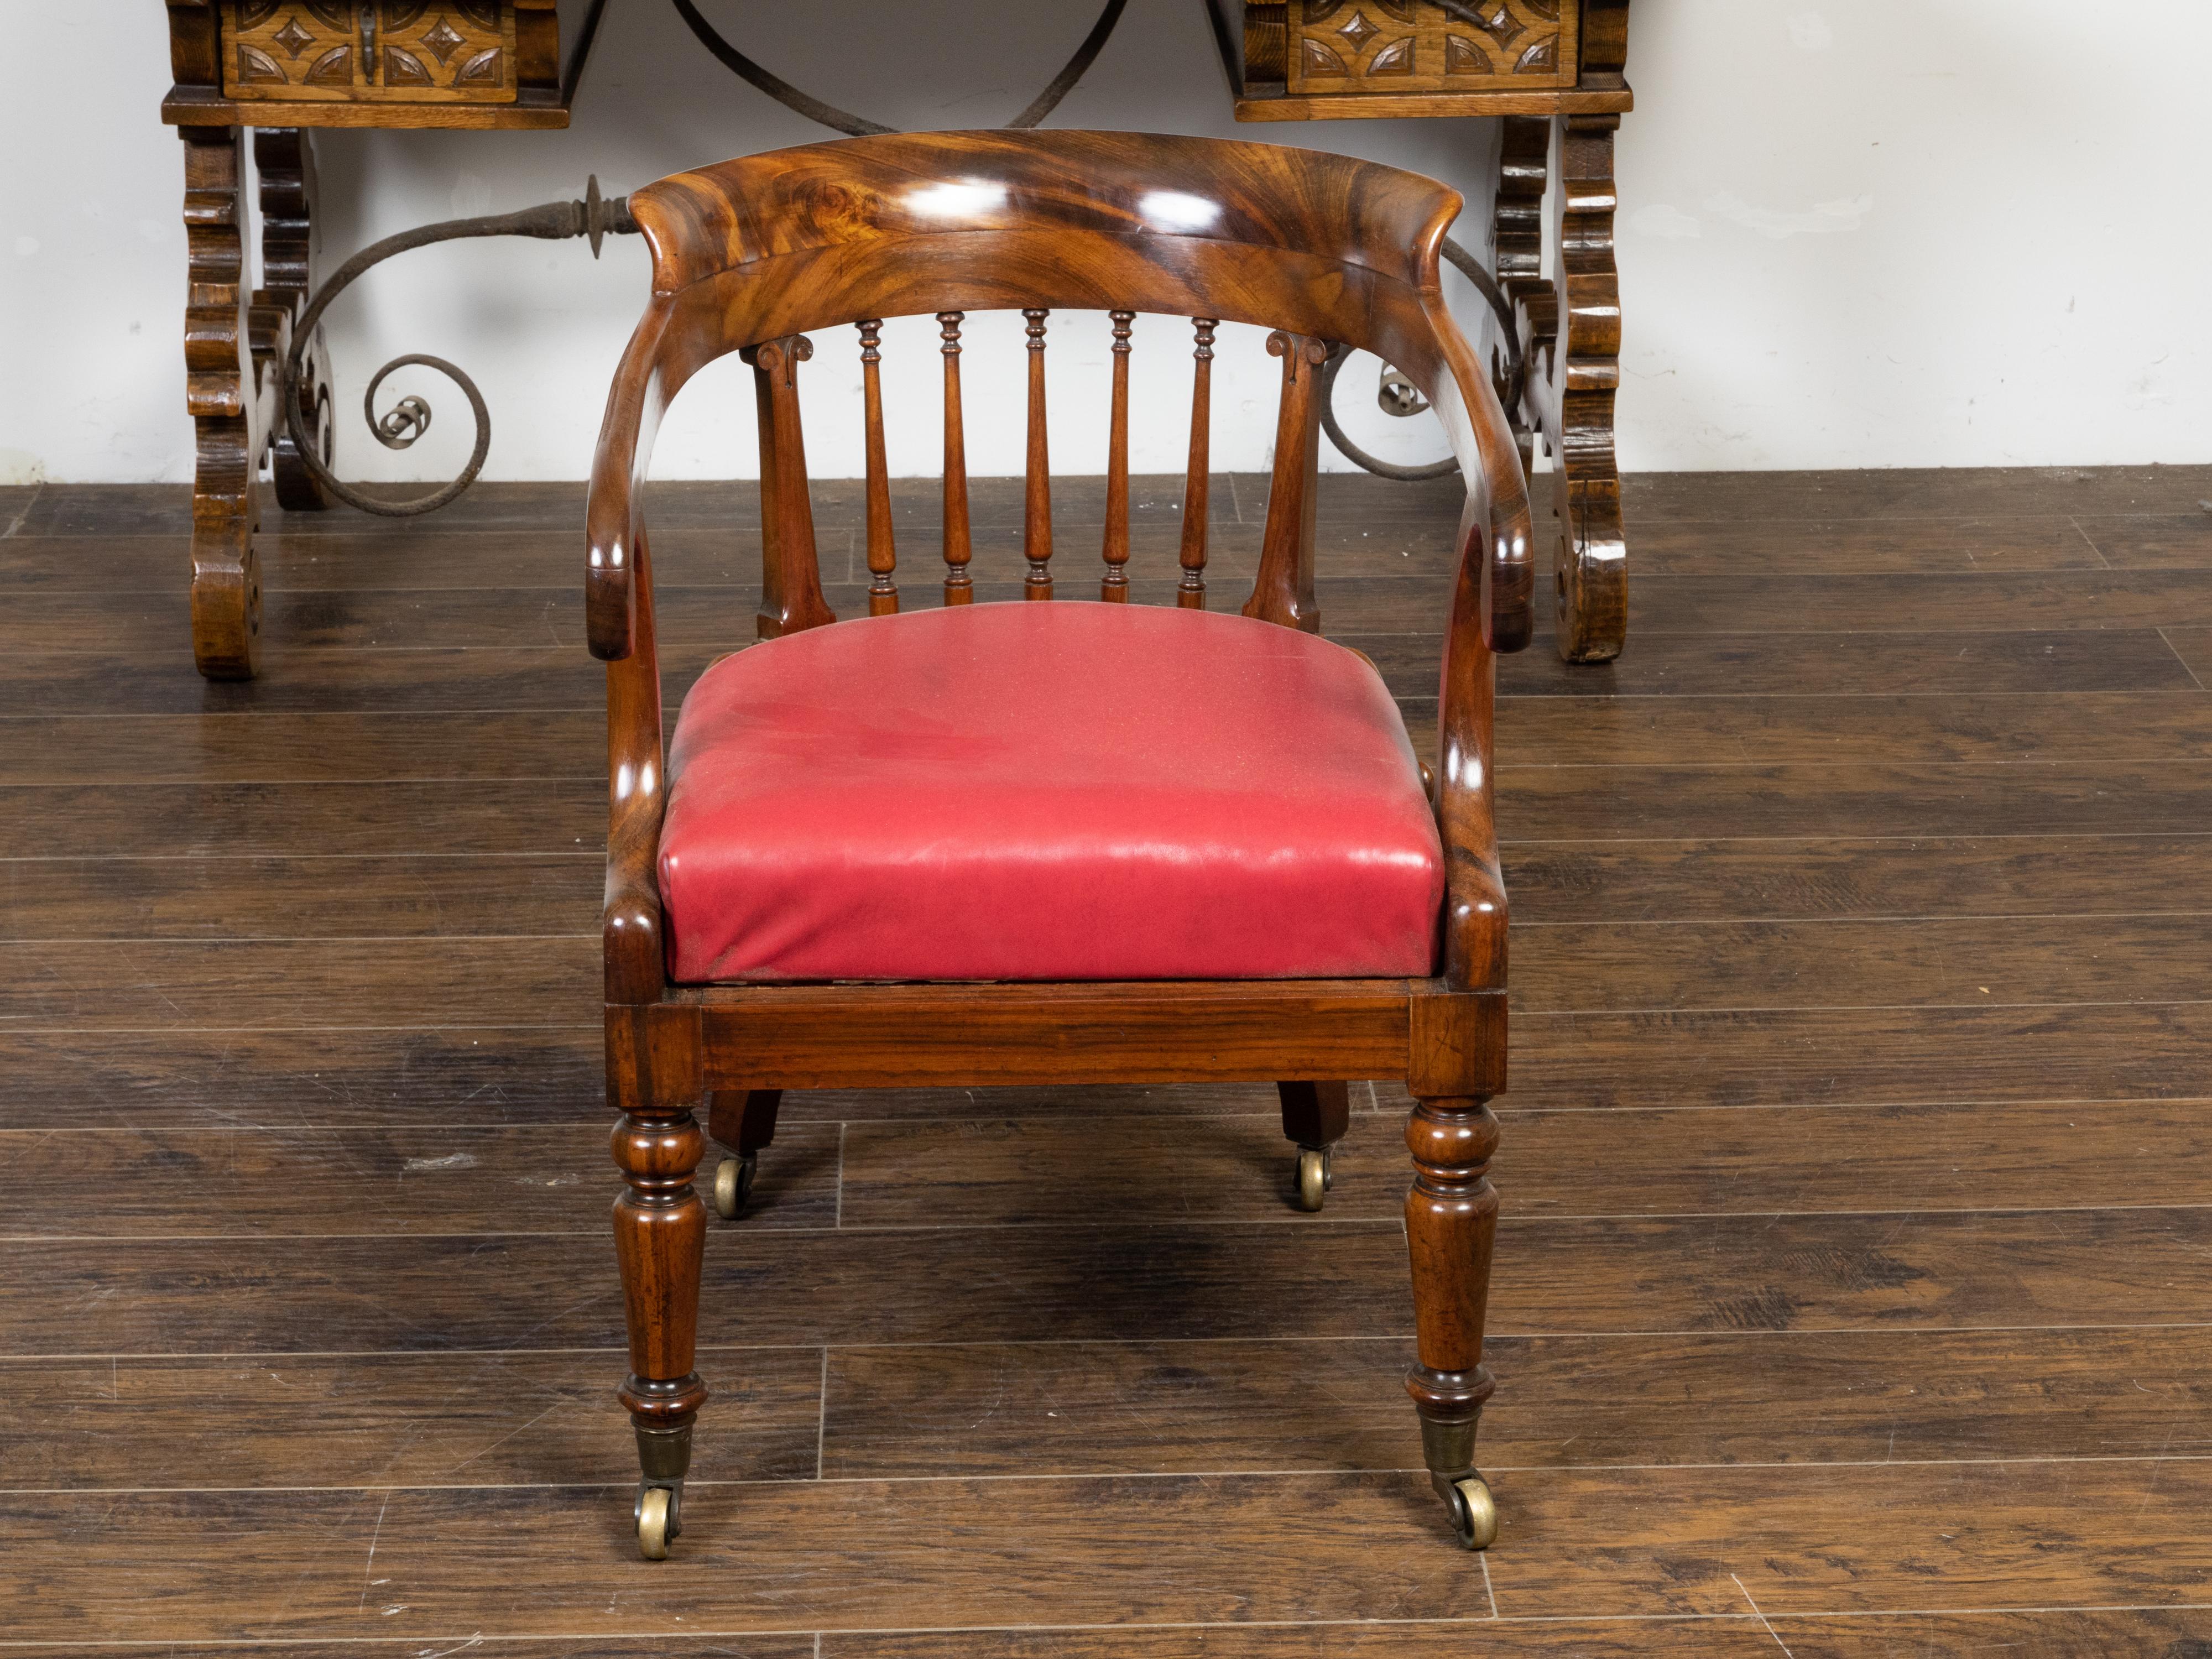 An English Regency period mahogany horseshoe back armchair from the 19th century, with balusters, large scrolling arms, carved volutes, turned legs, petite casters and red upholstery. Created in England during the Regency period in the early years